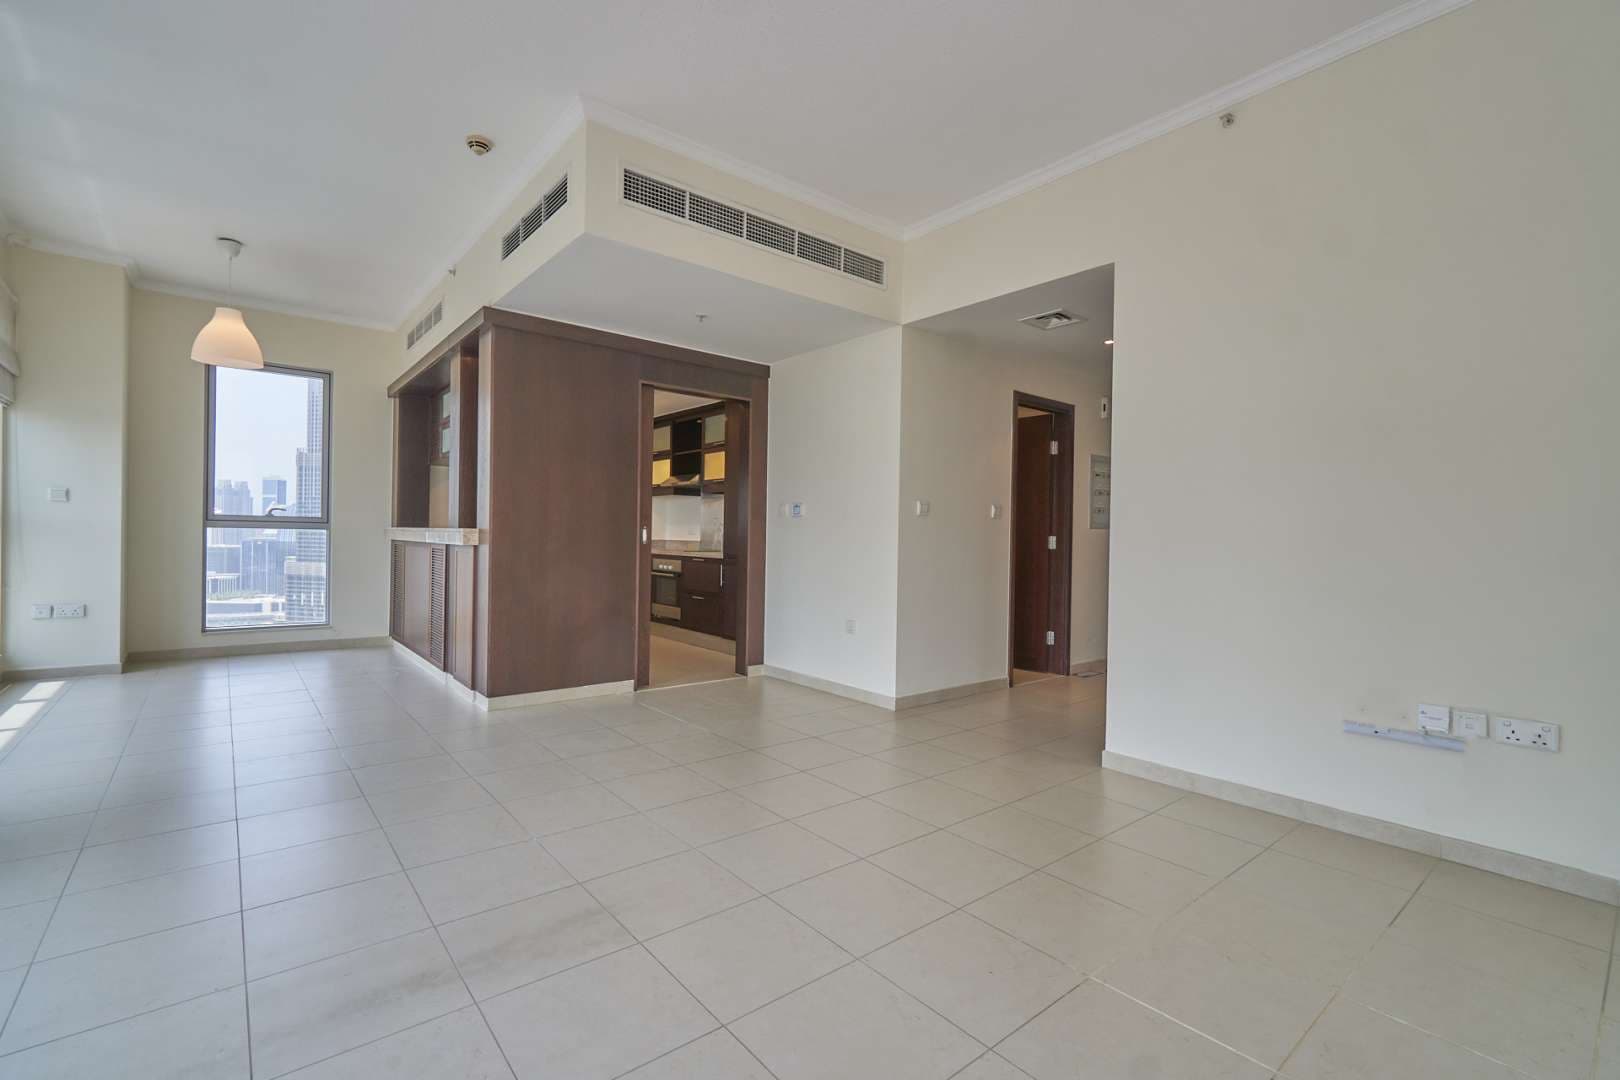 1 Bedroom Apartment For Rent The Residences Lp11596 1ee9565460623200.jpg